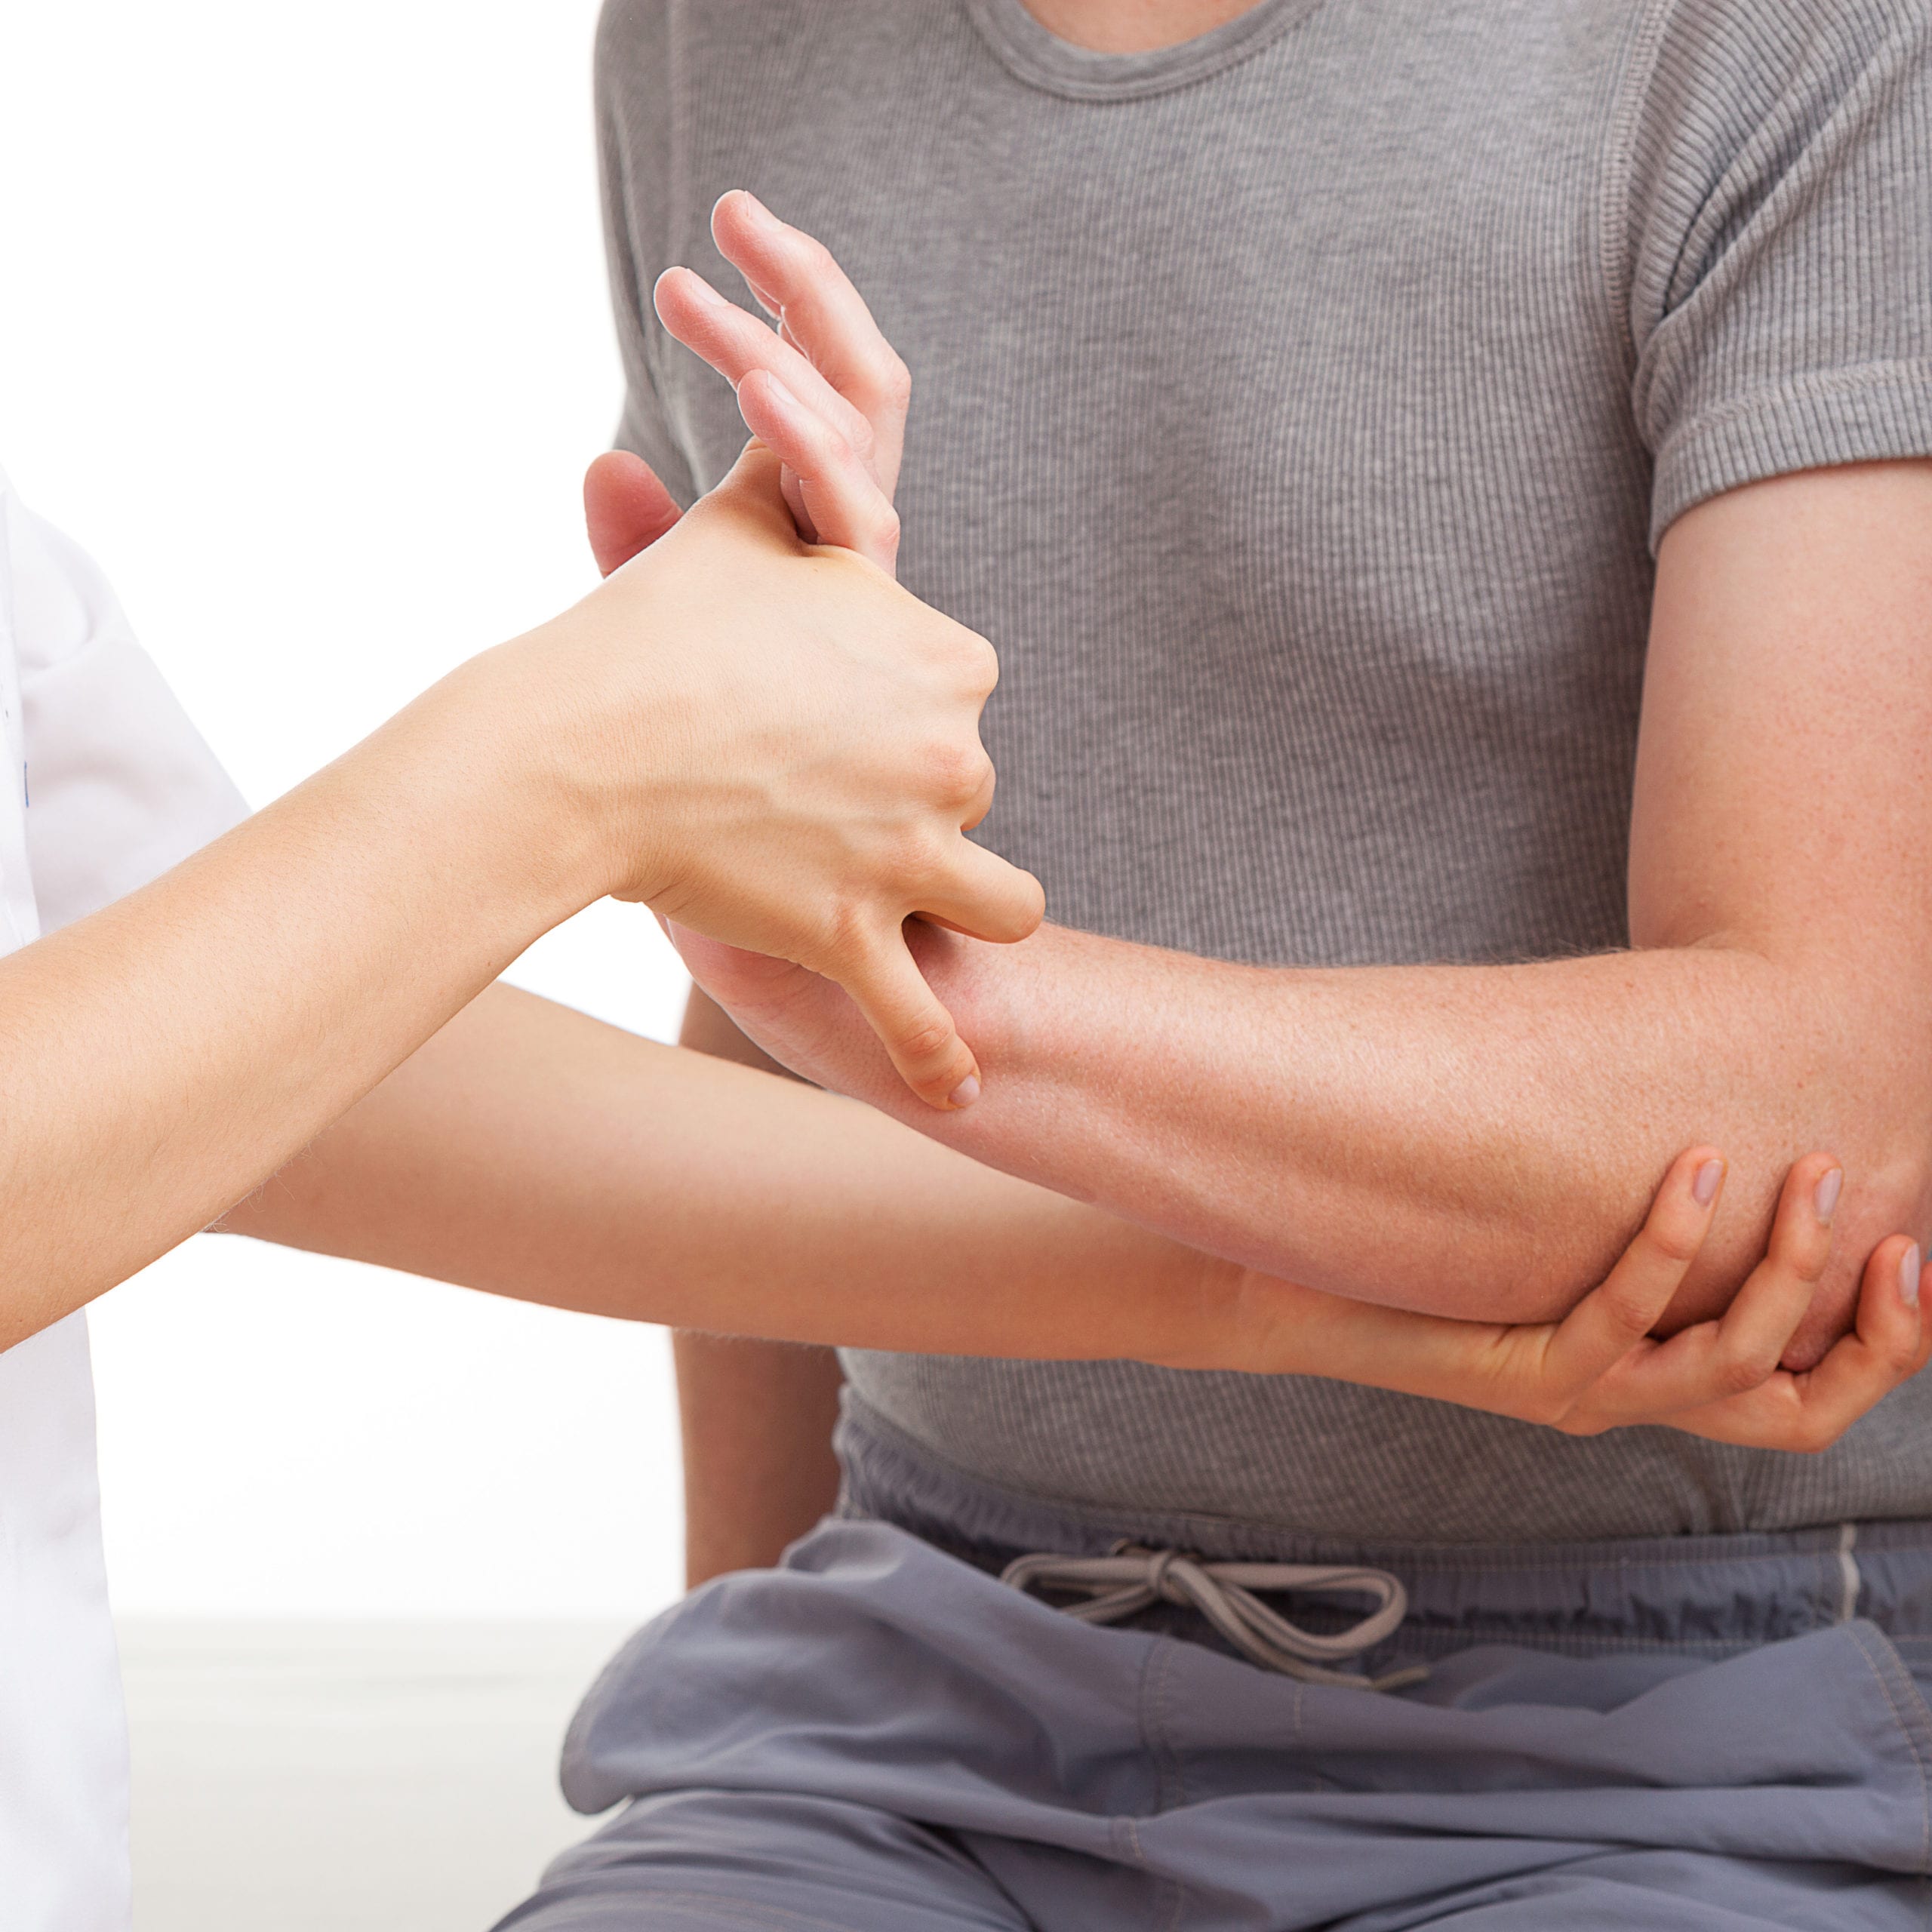 Certified Hand Therapy Near Me | Services | North Boulder ...